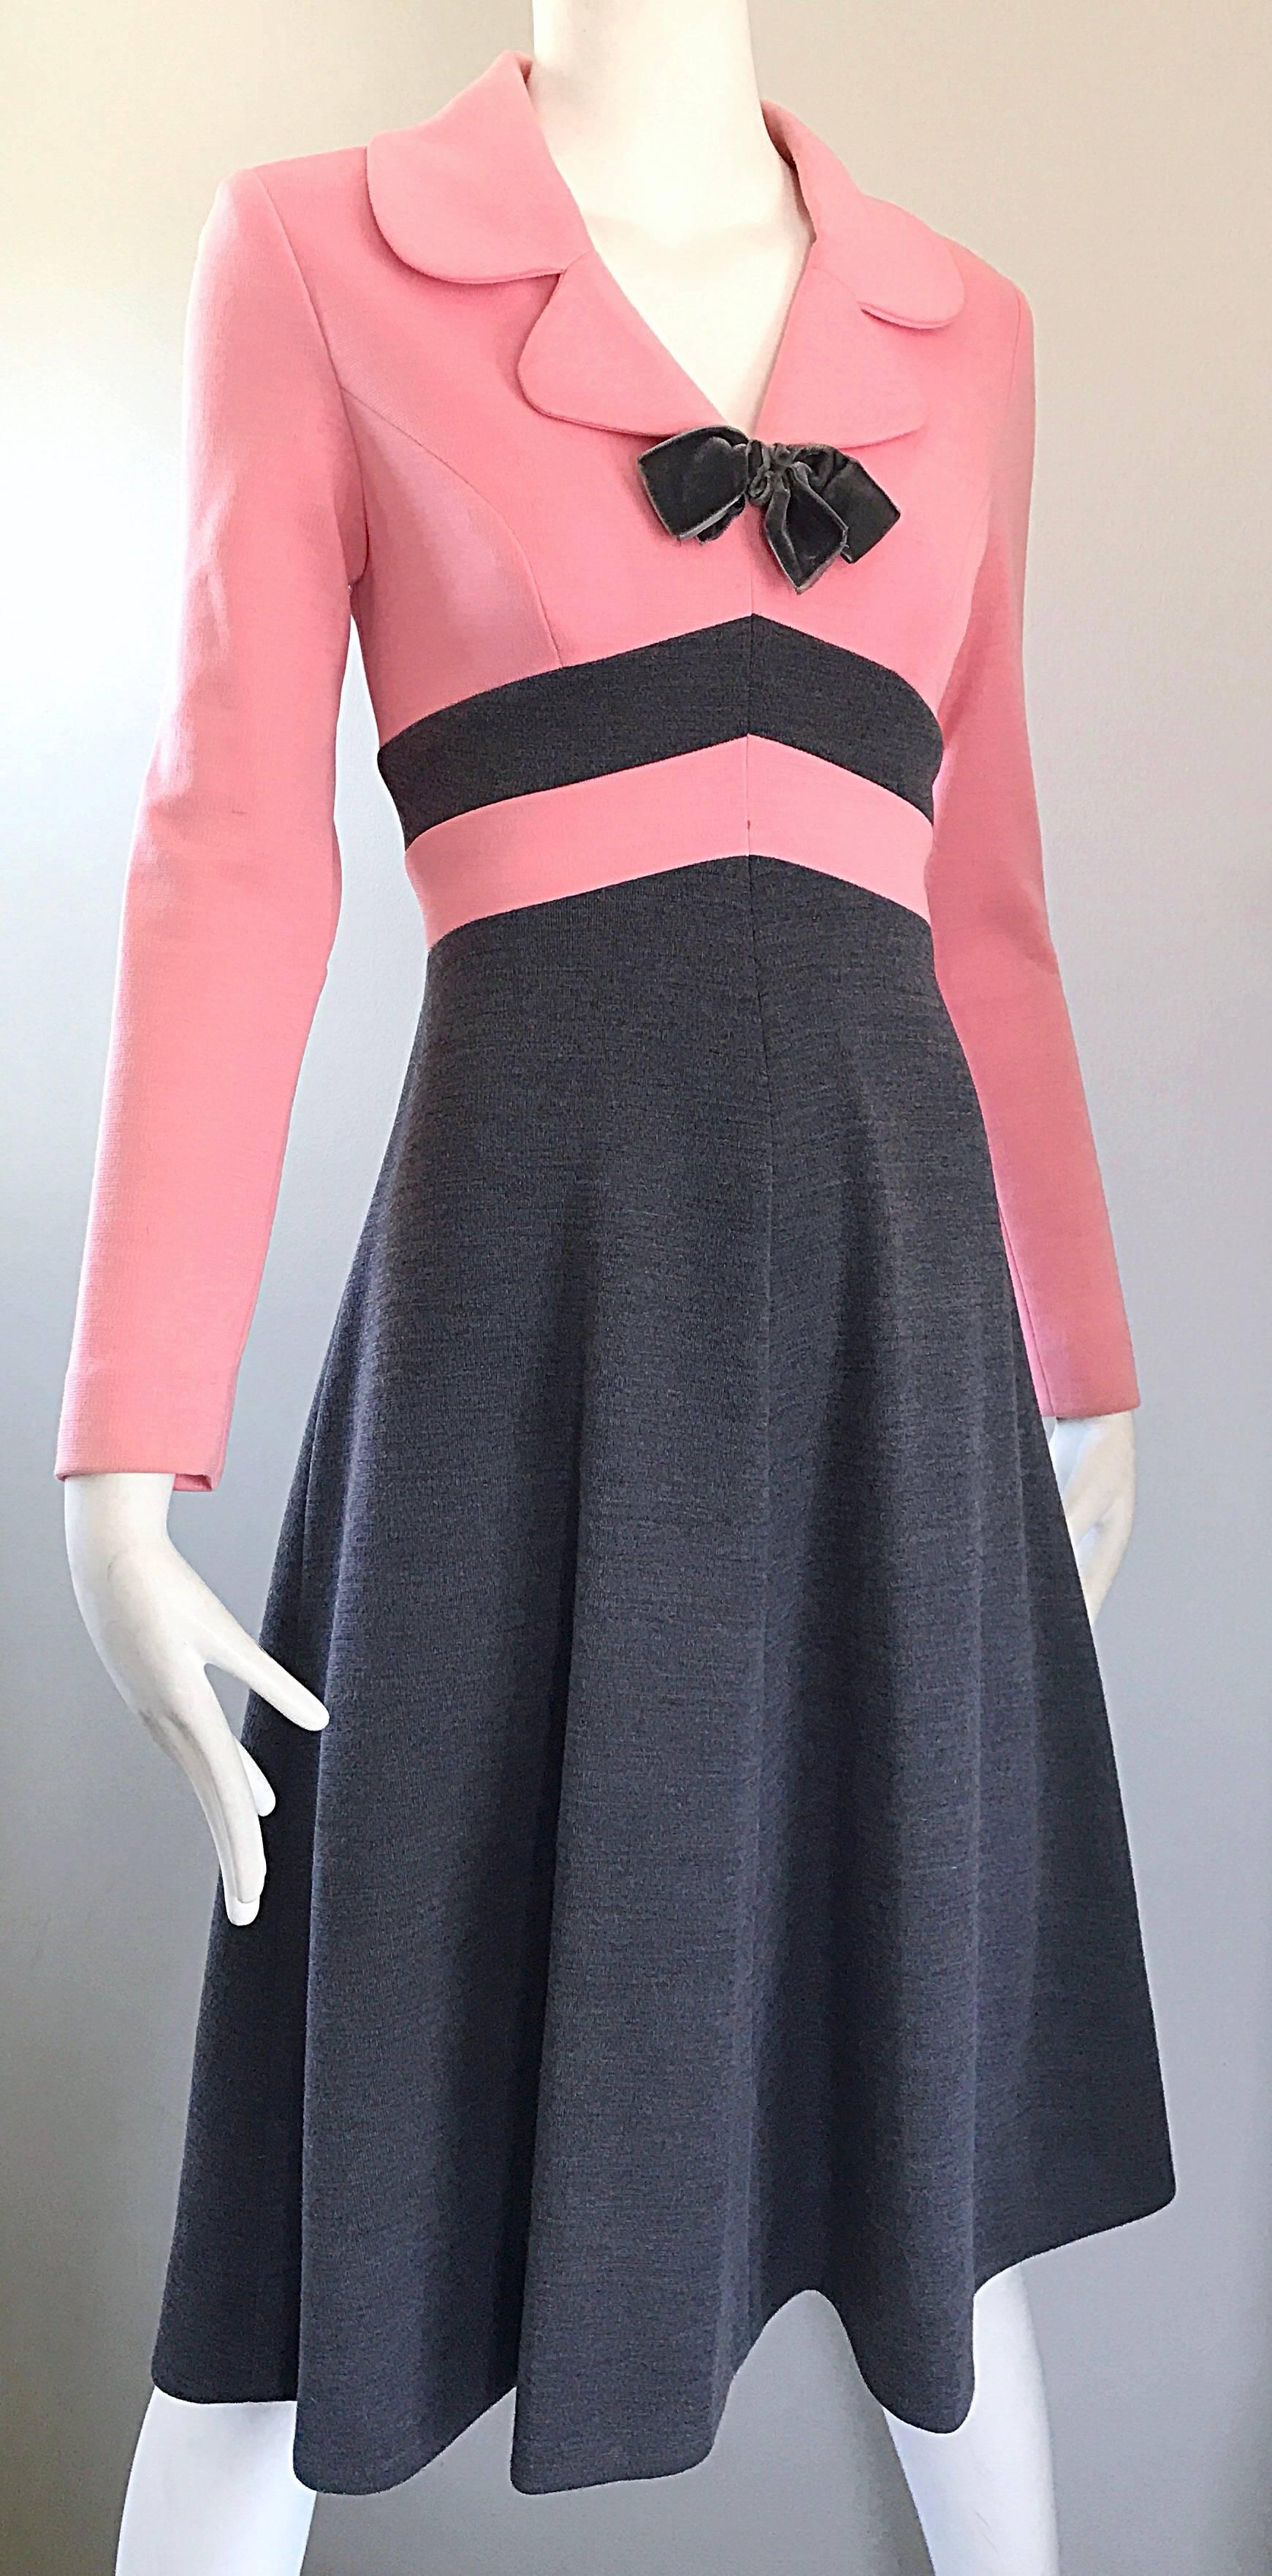 Black 1960s Bubblegum Pink and Charcoal Gray Long Sleeve Vintage 60s Knit A Line Dress